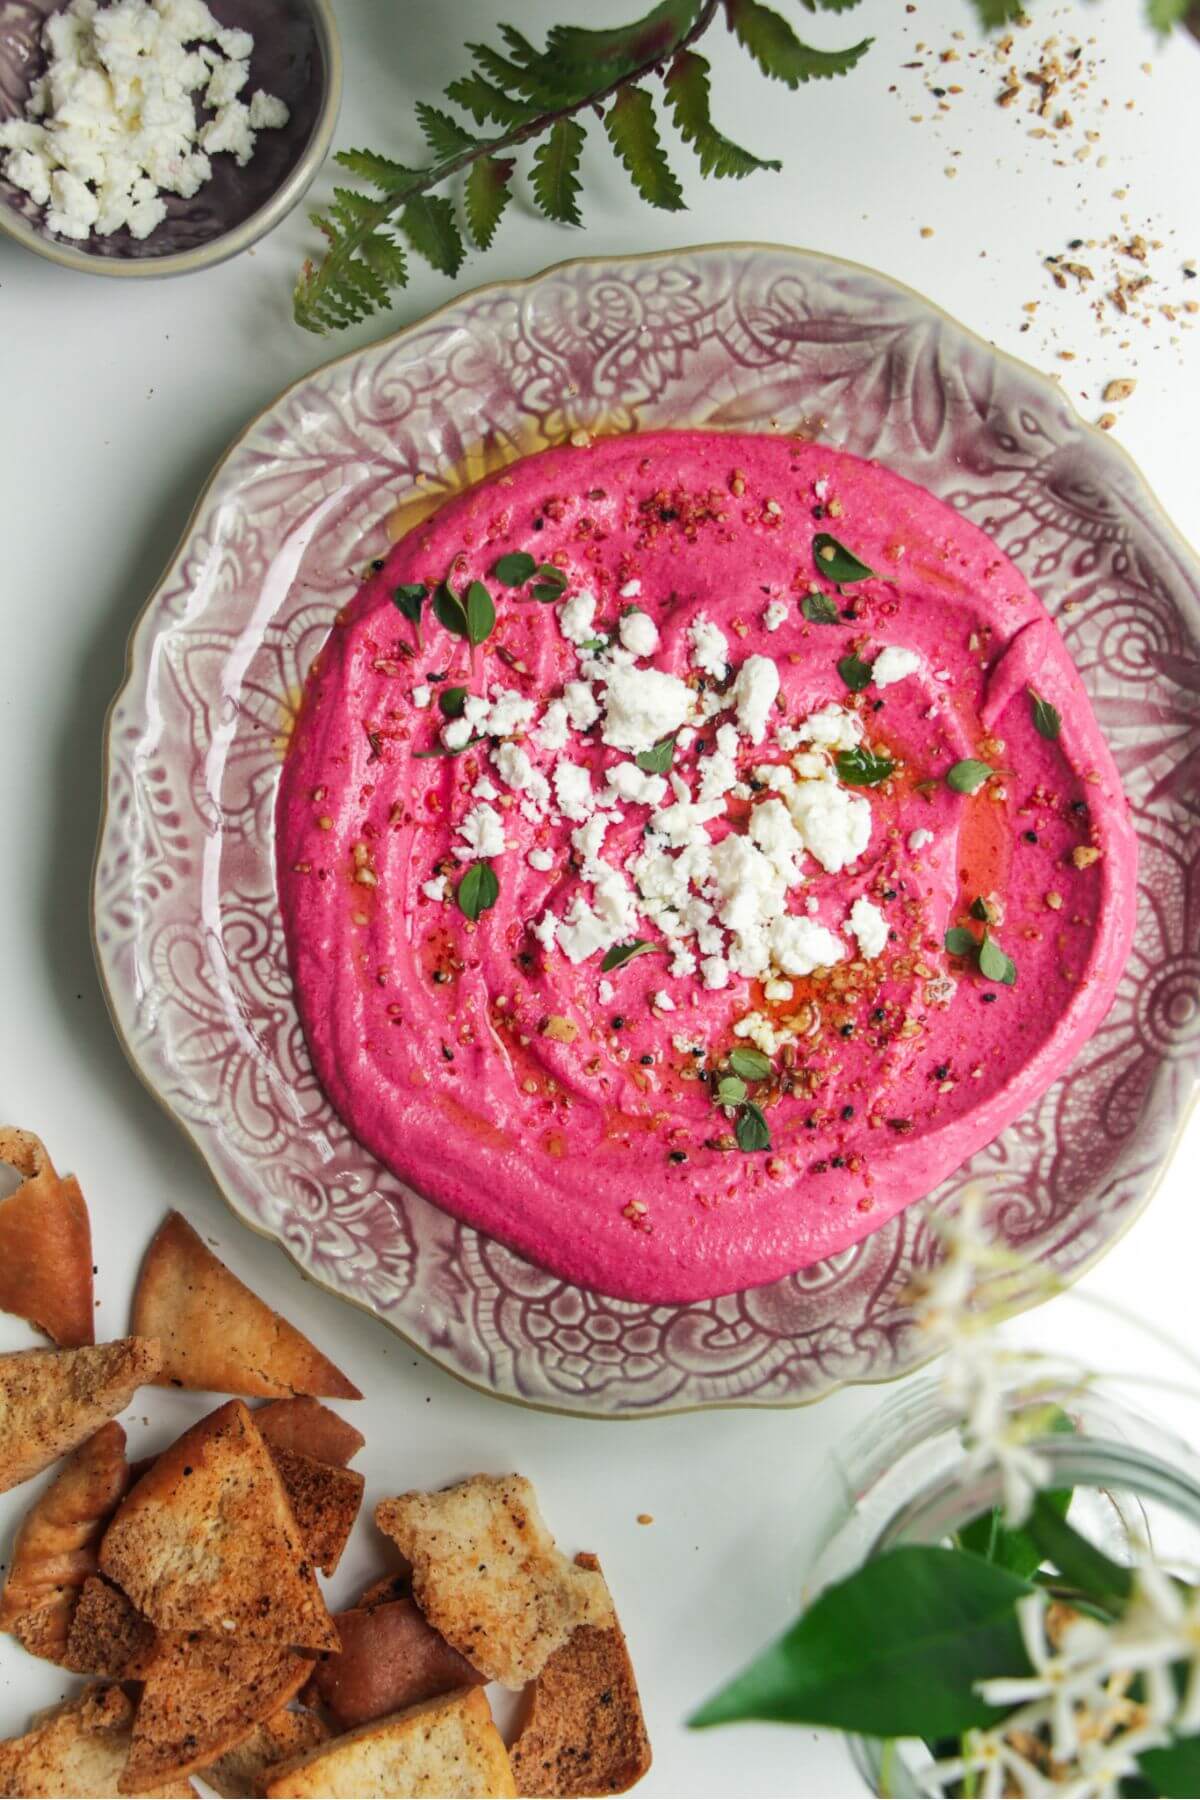 Bright pink beet feta dip on a pink plate with feta crumbled on top and pita chips on the side.